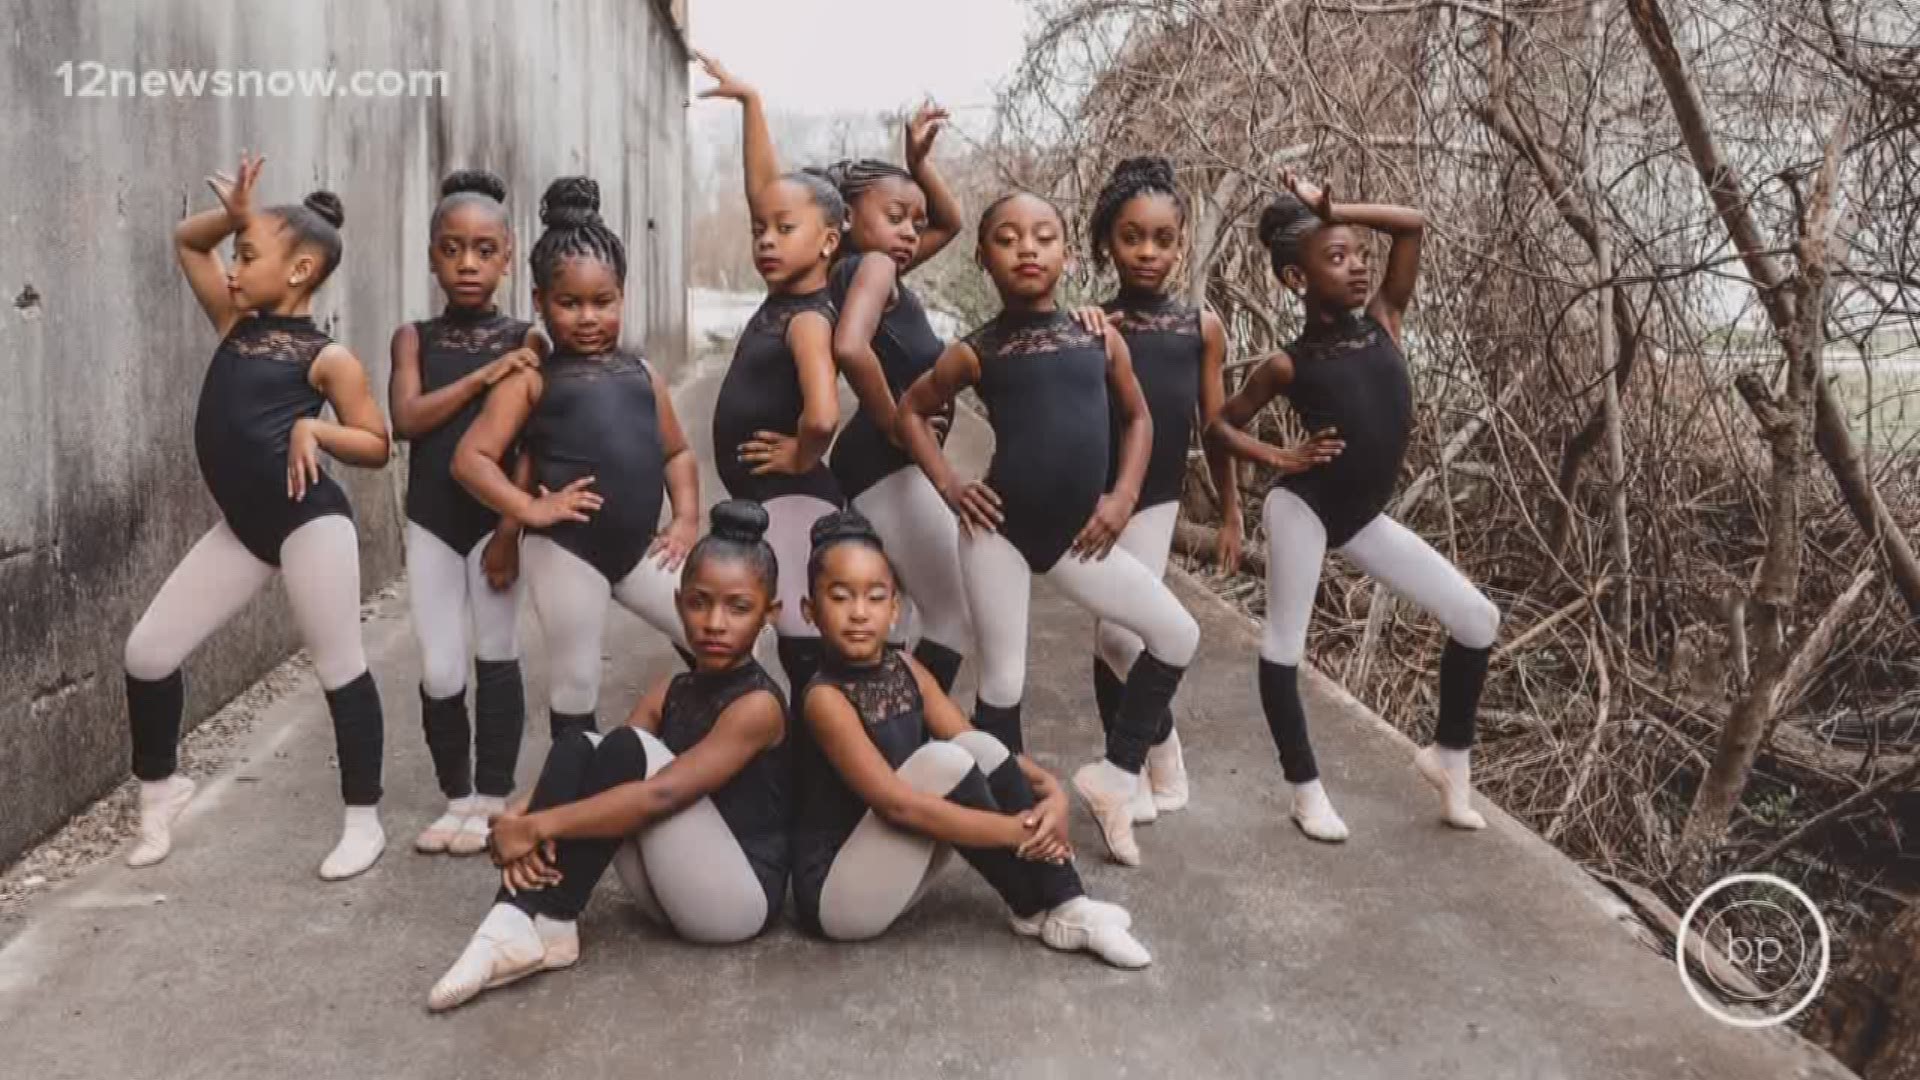 The photo shoot featured several adorable ballerinas during Black History Month. Now, millions have seen the heartwarming photo